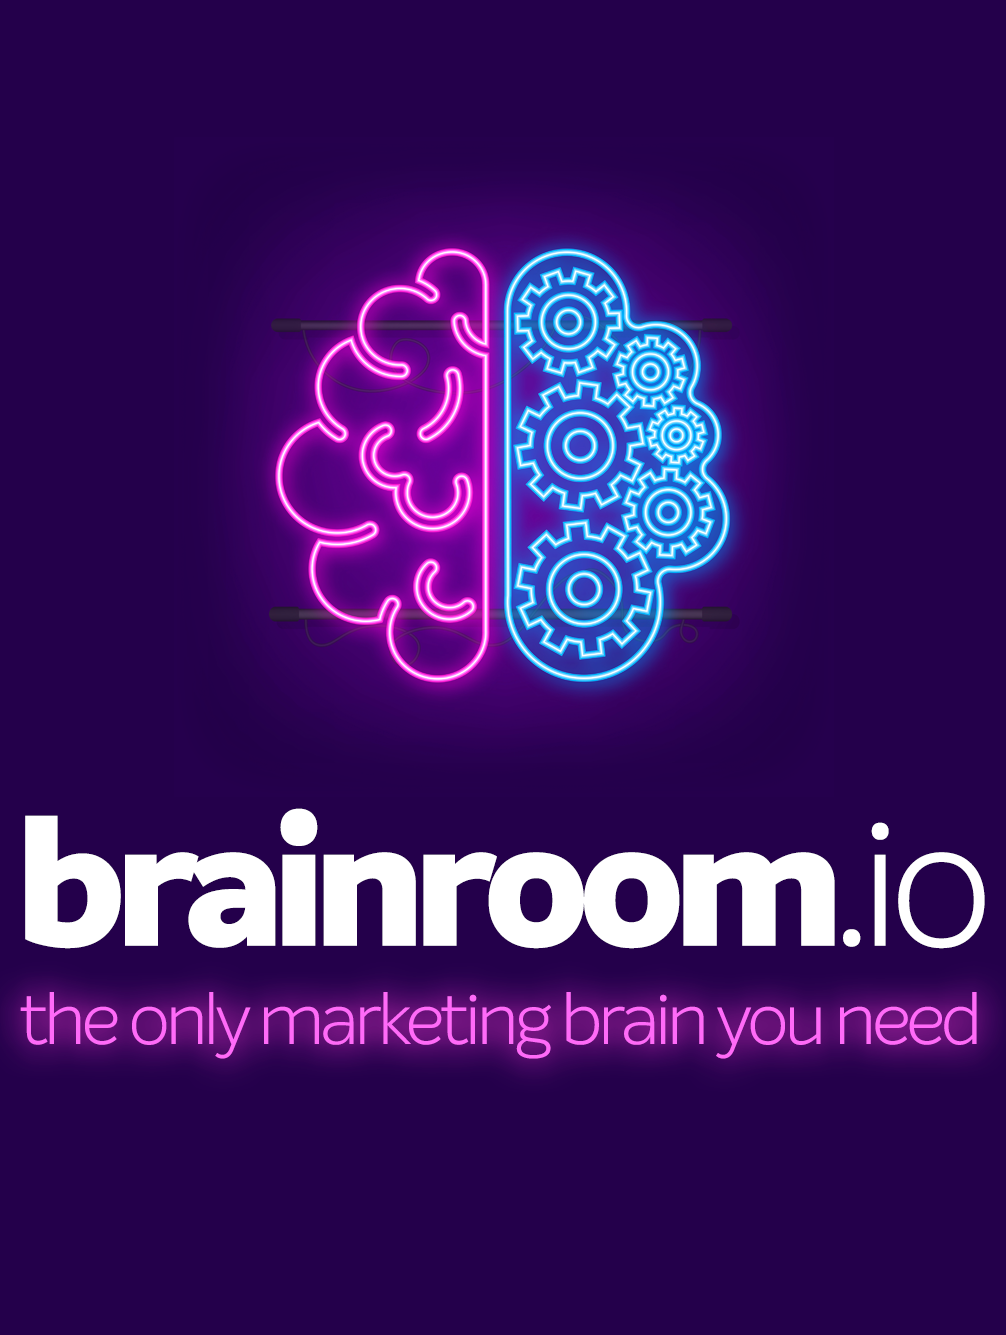 Brainroom.io - The only marketing brain you need.